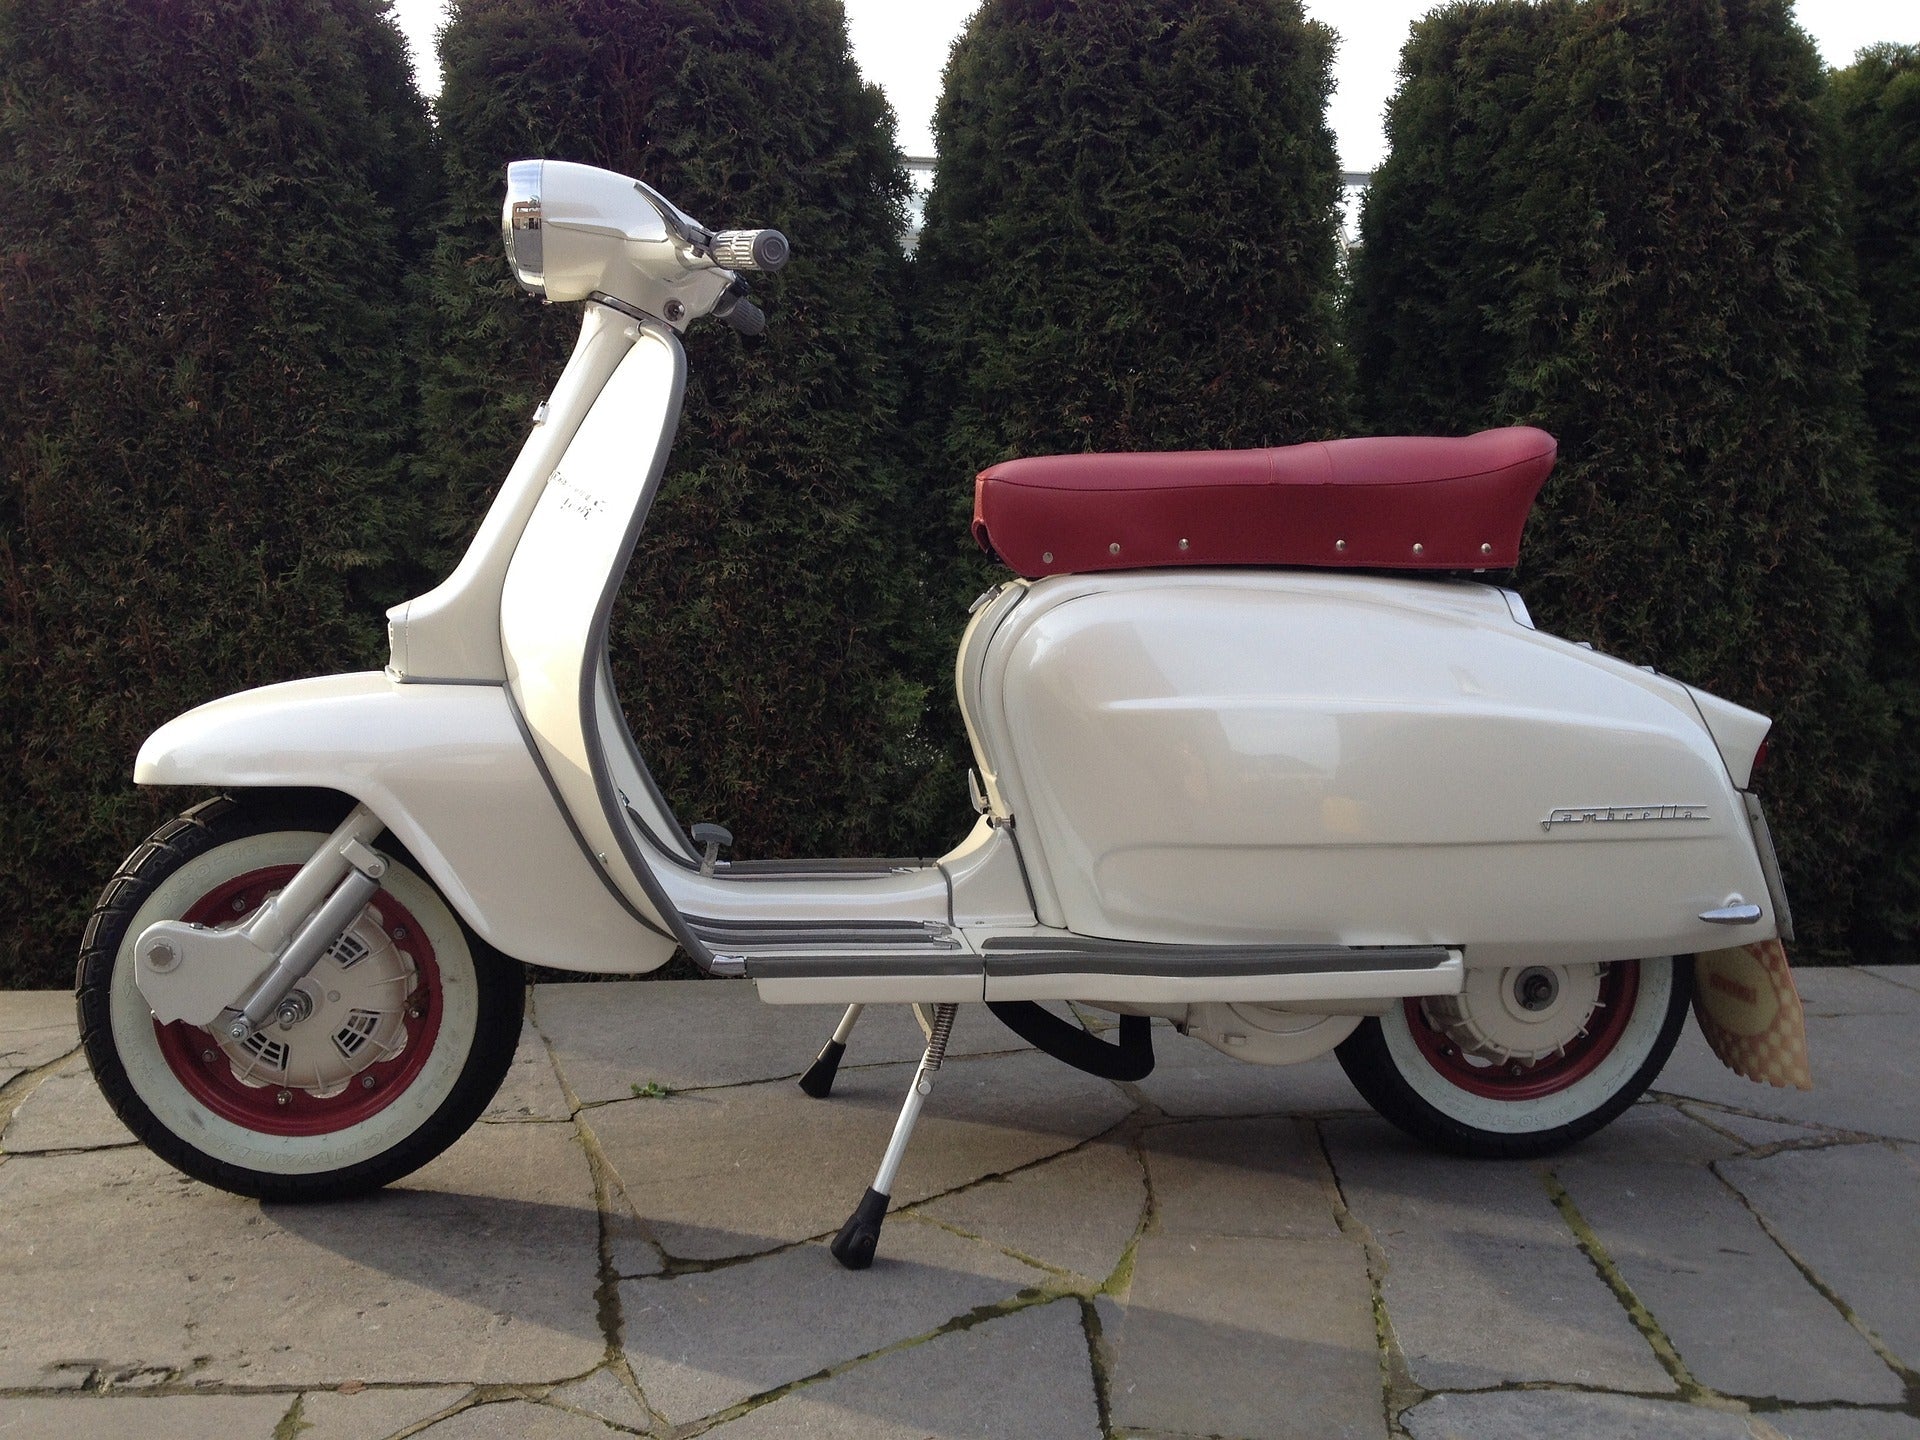 A Brief History of Lambretta: How the Iconic Scooter Was Born